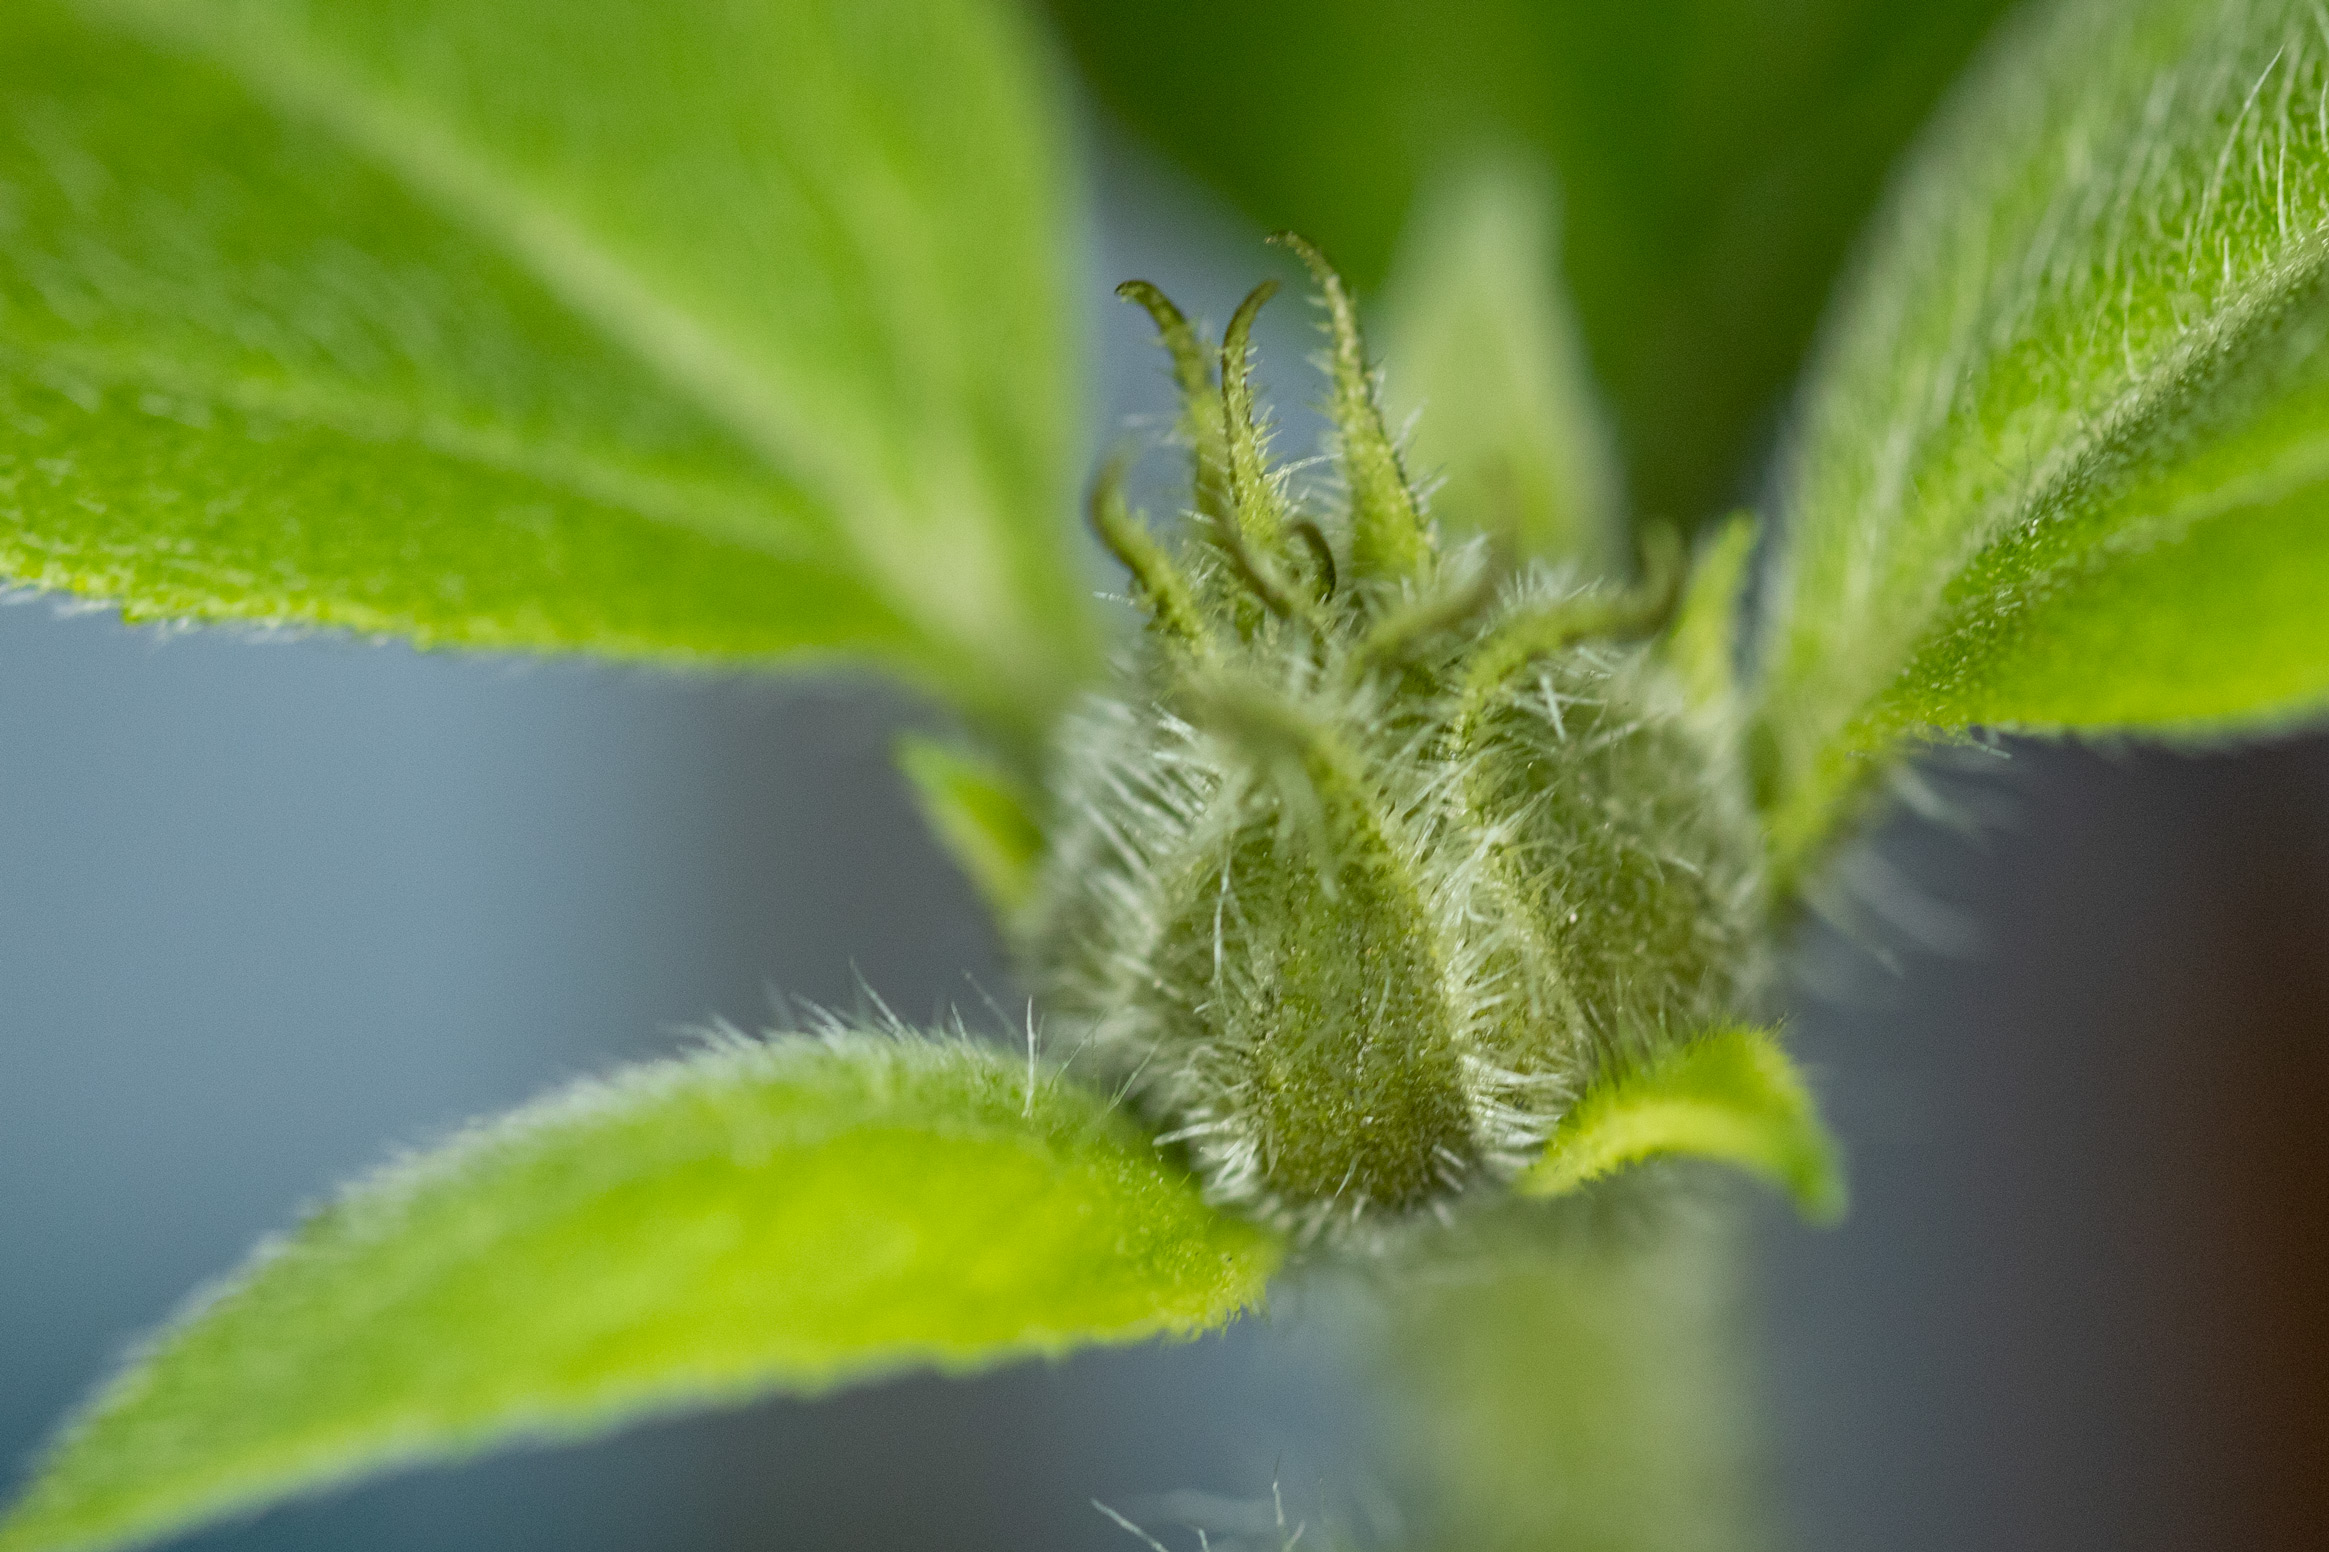 Macro shot of a young sunflower bud